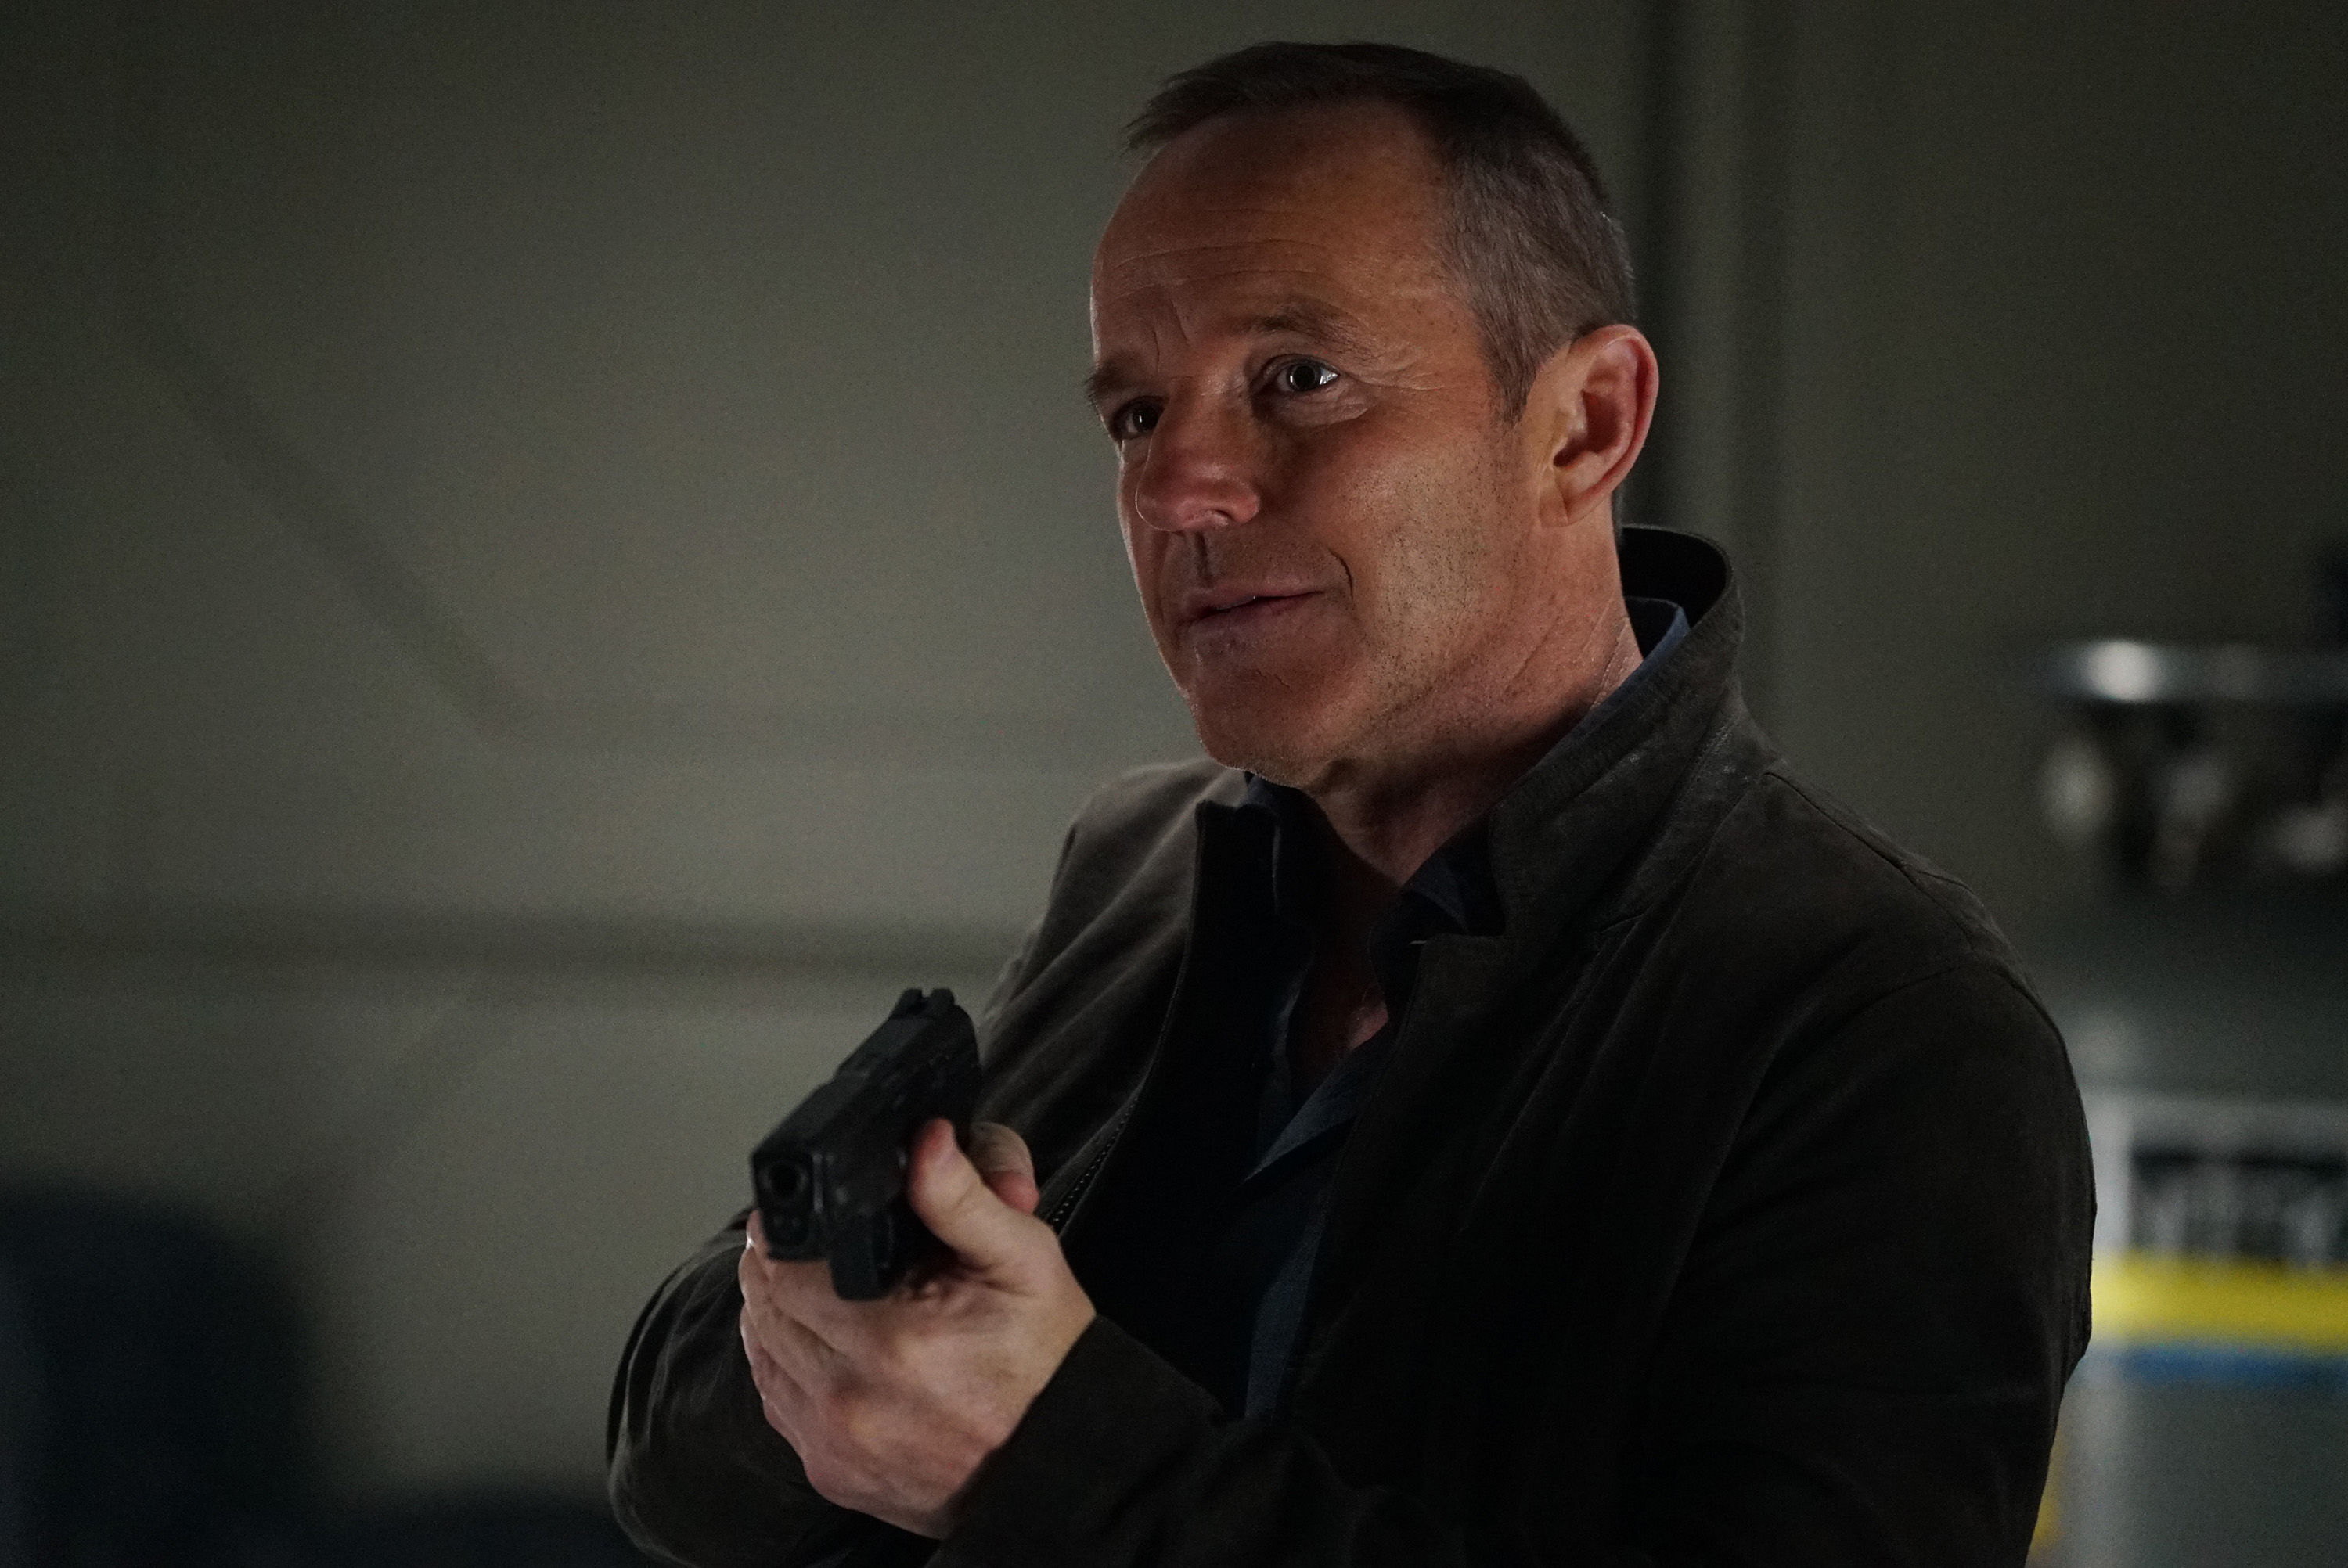 CLark Gregg Coulson Agents of SHIELD